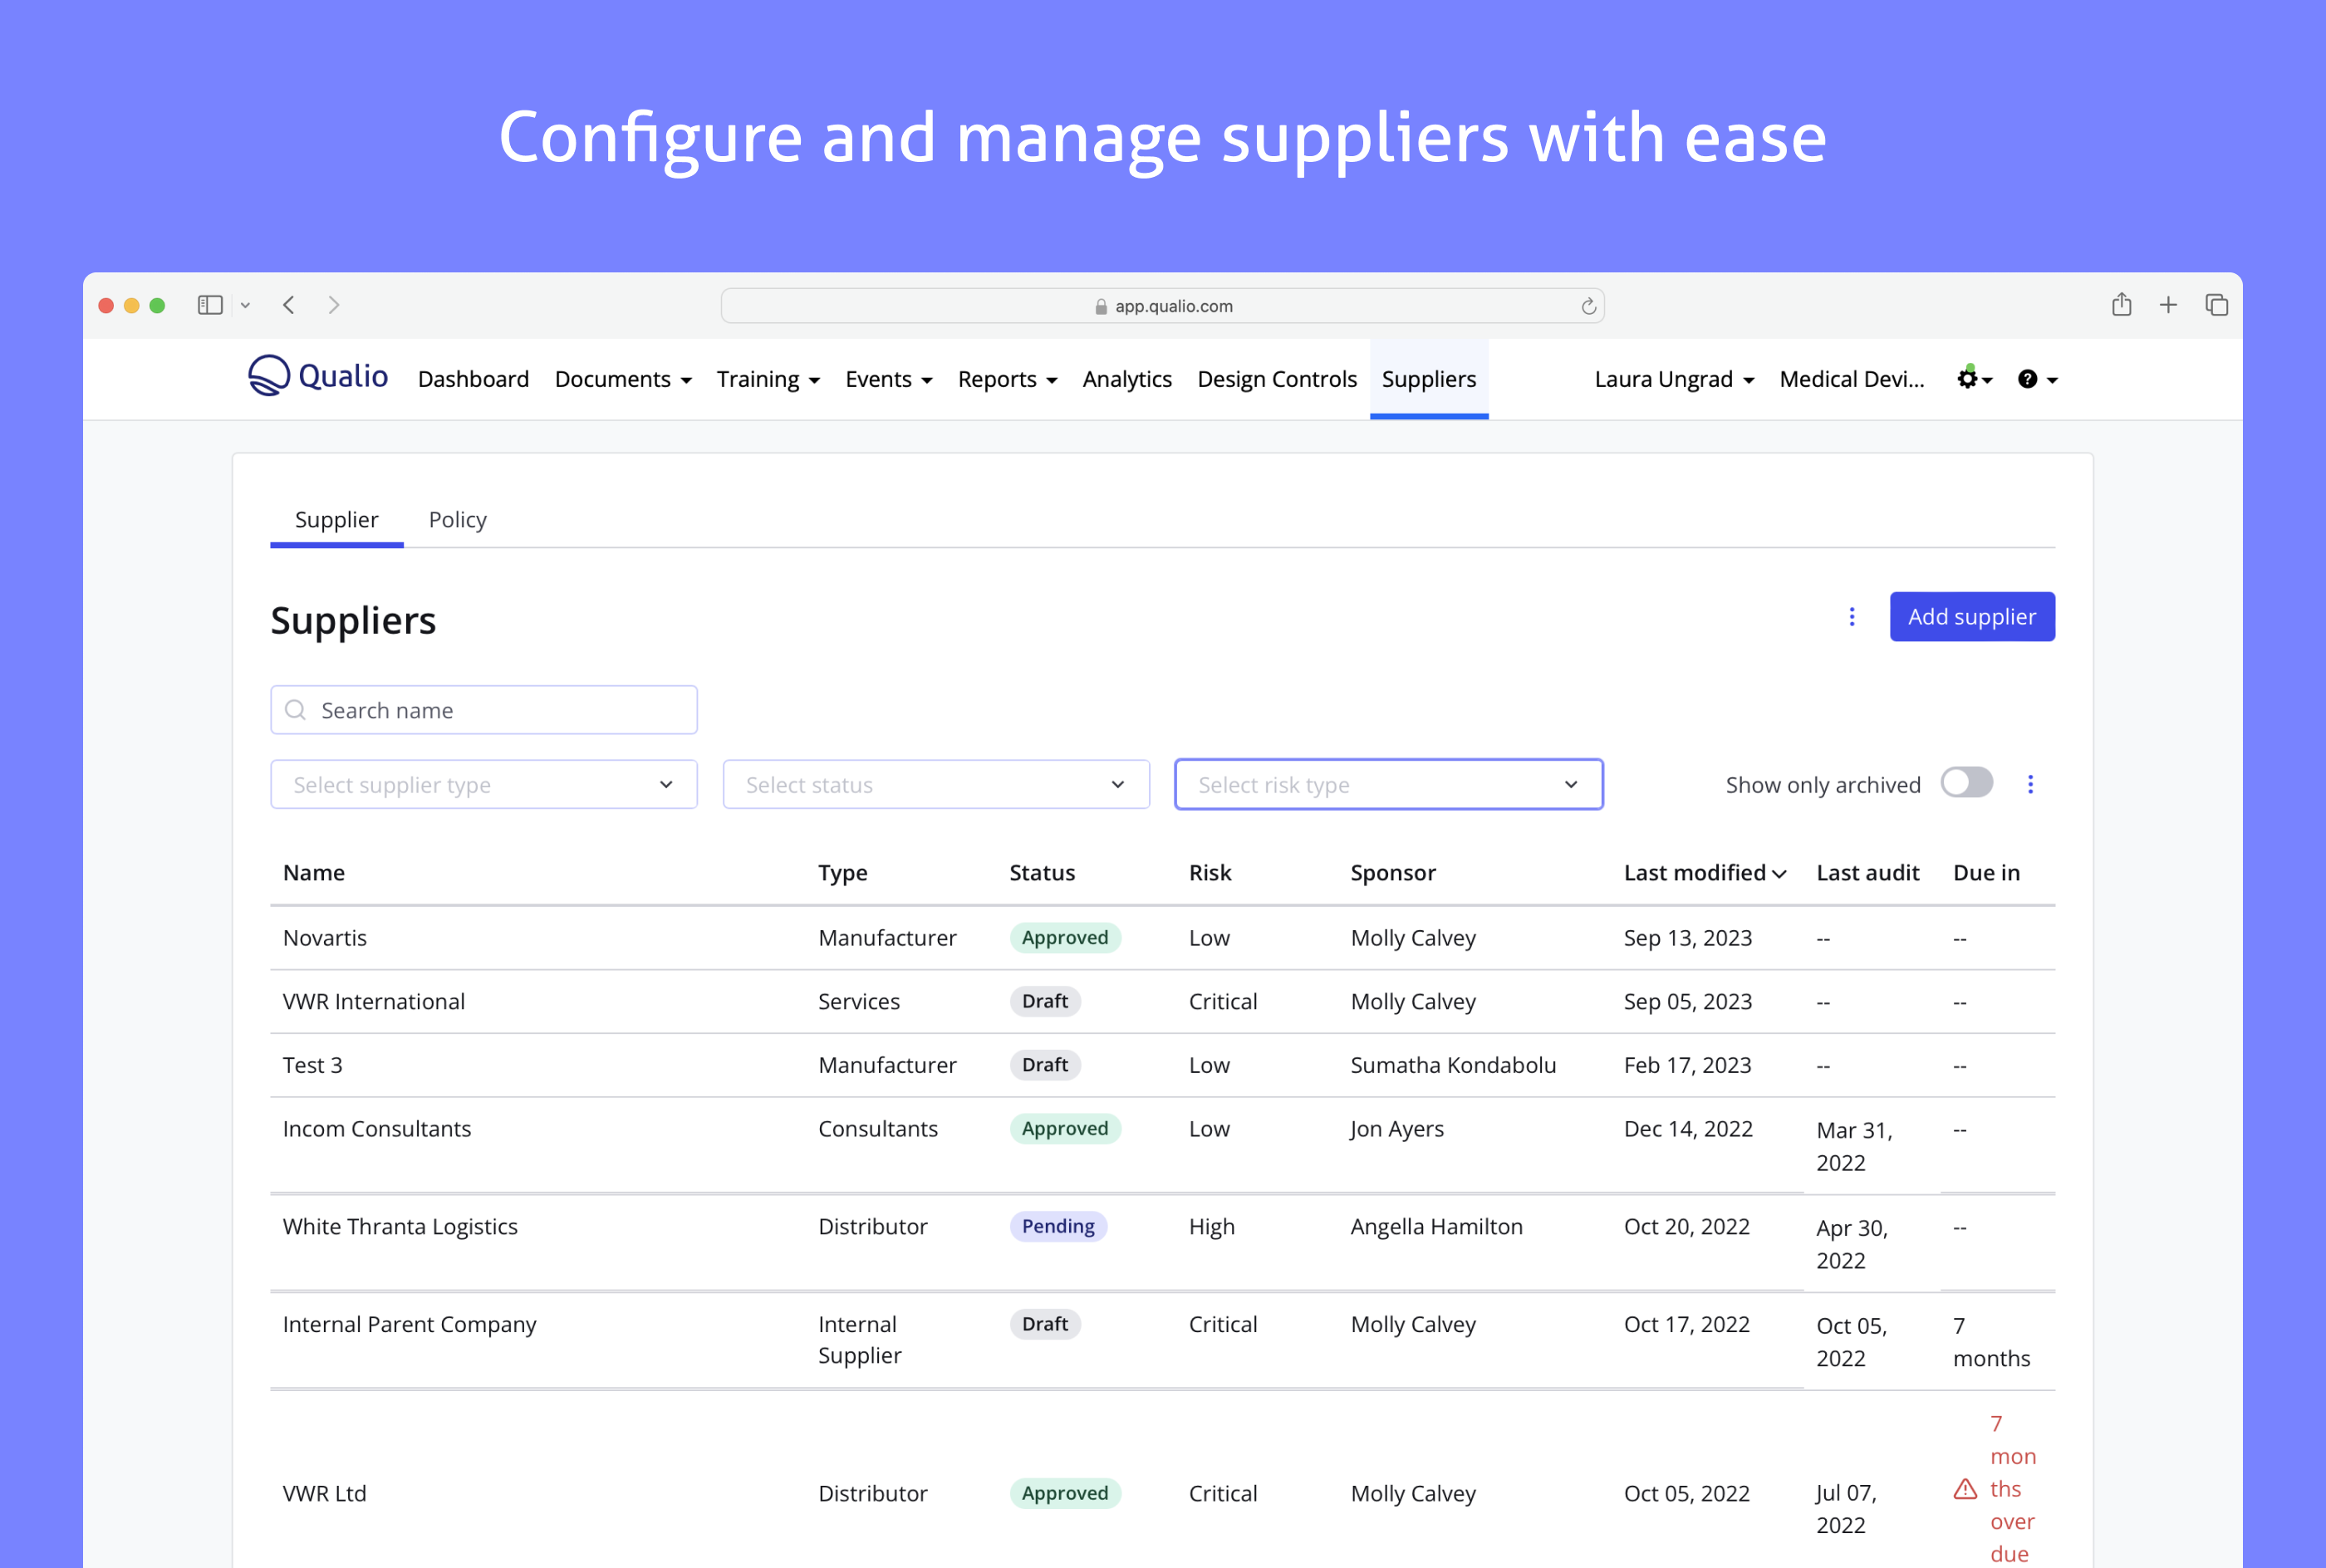 Configure and manage suppliers with ease